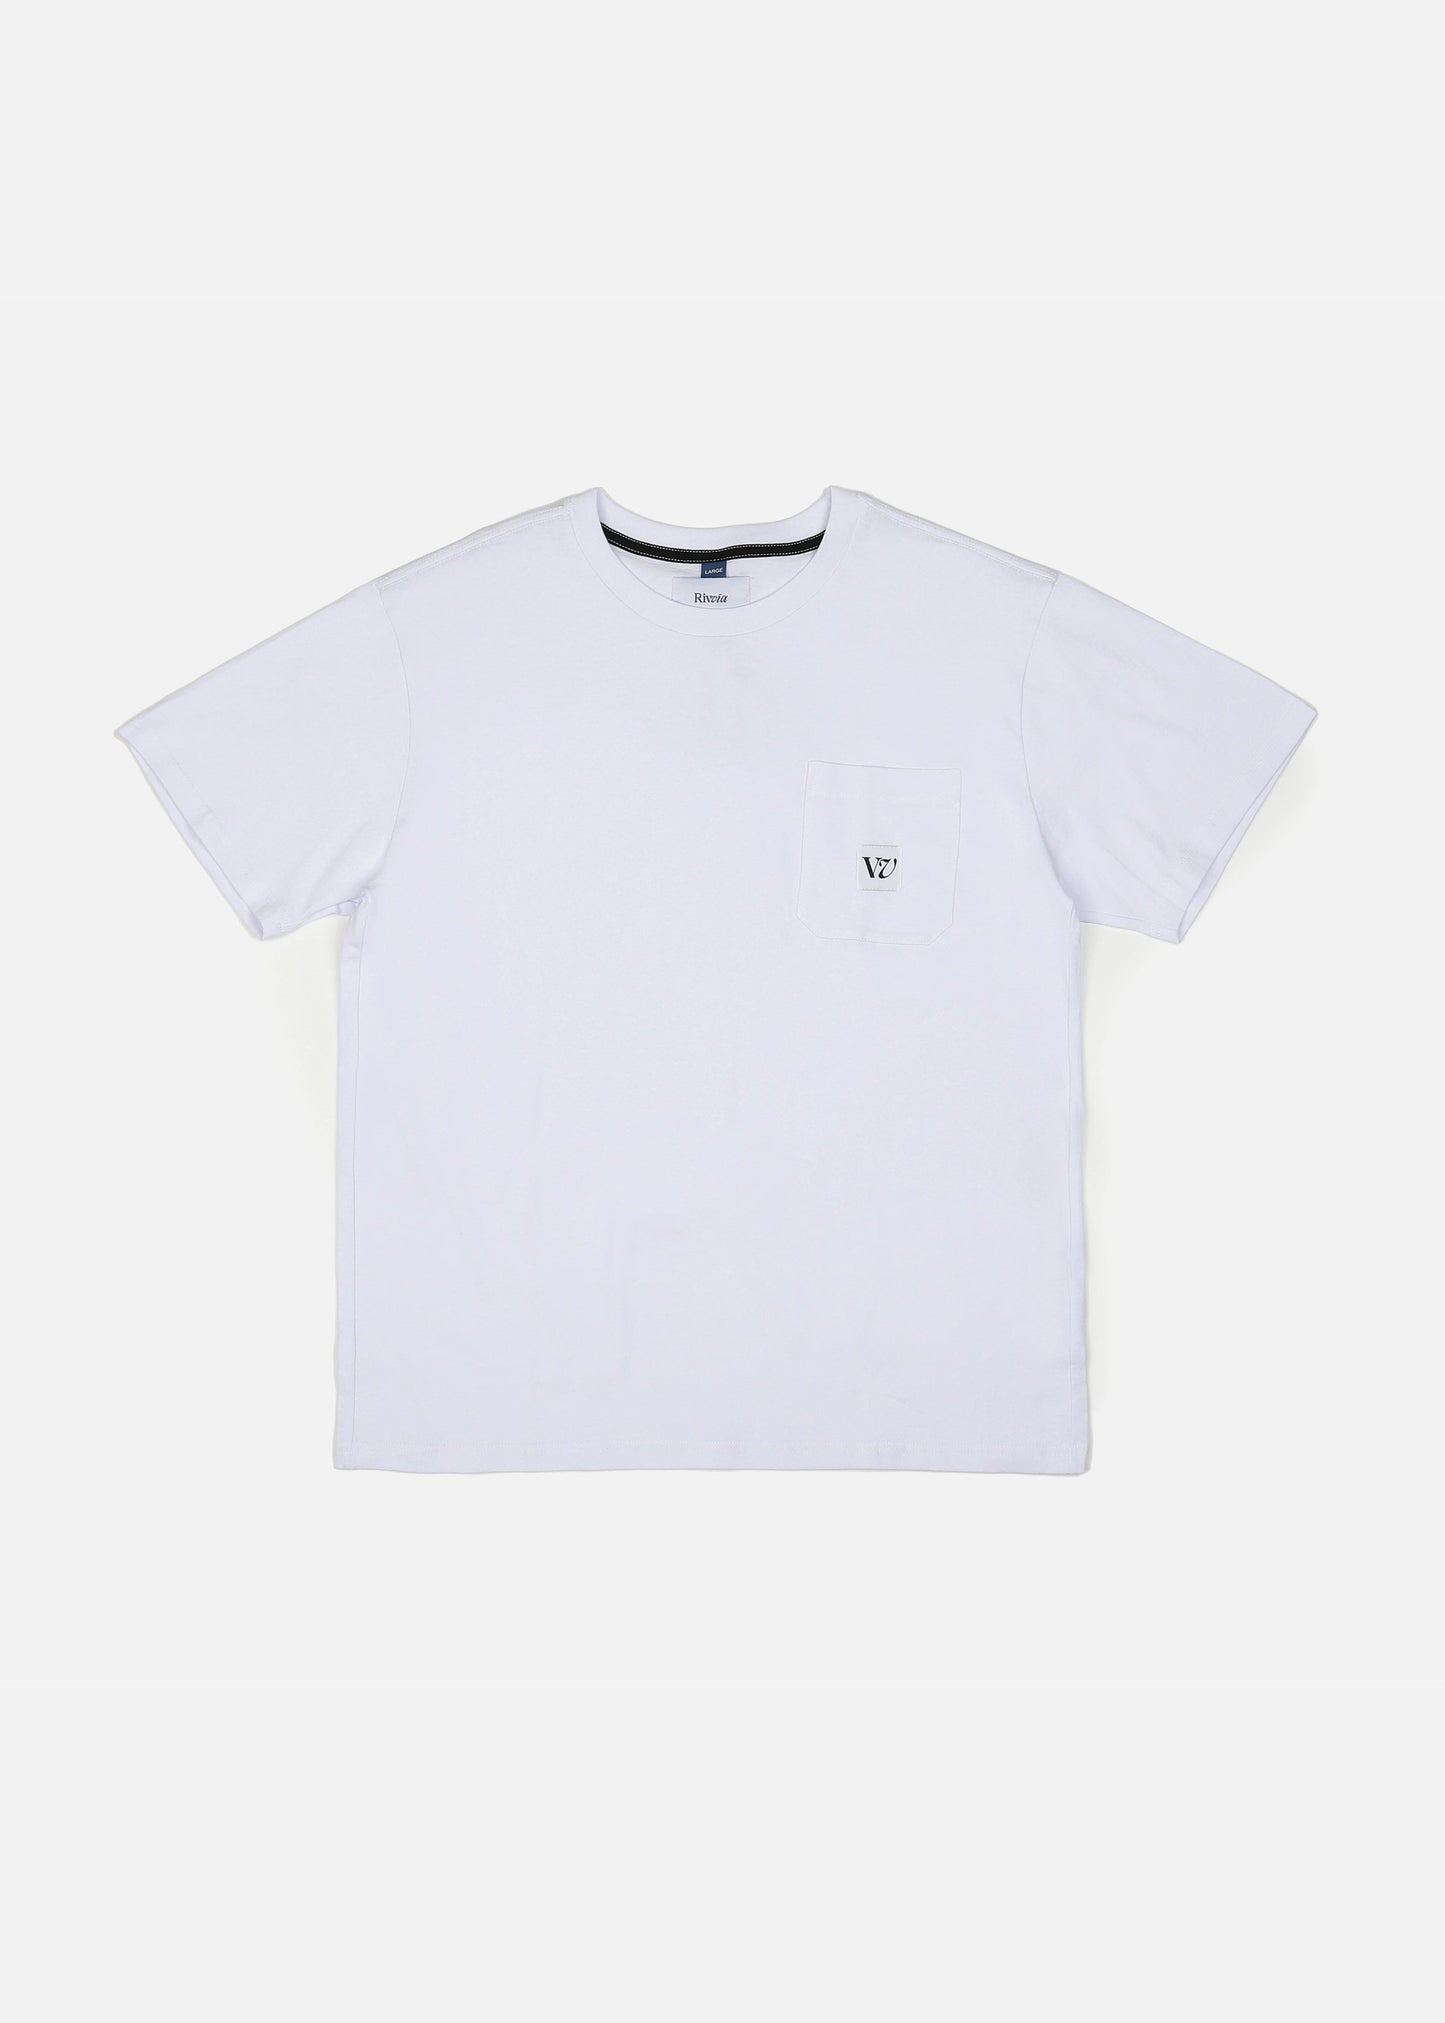 CAUSE & EFFECT T-SHIRT : WHITE